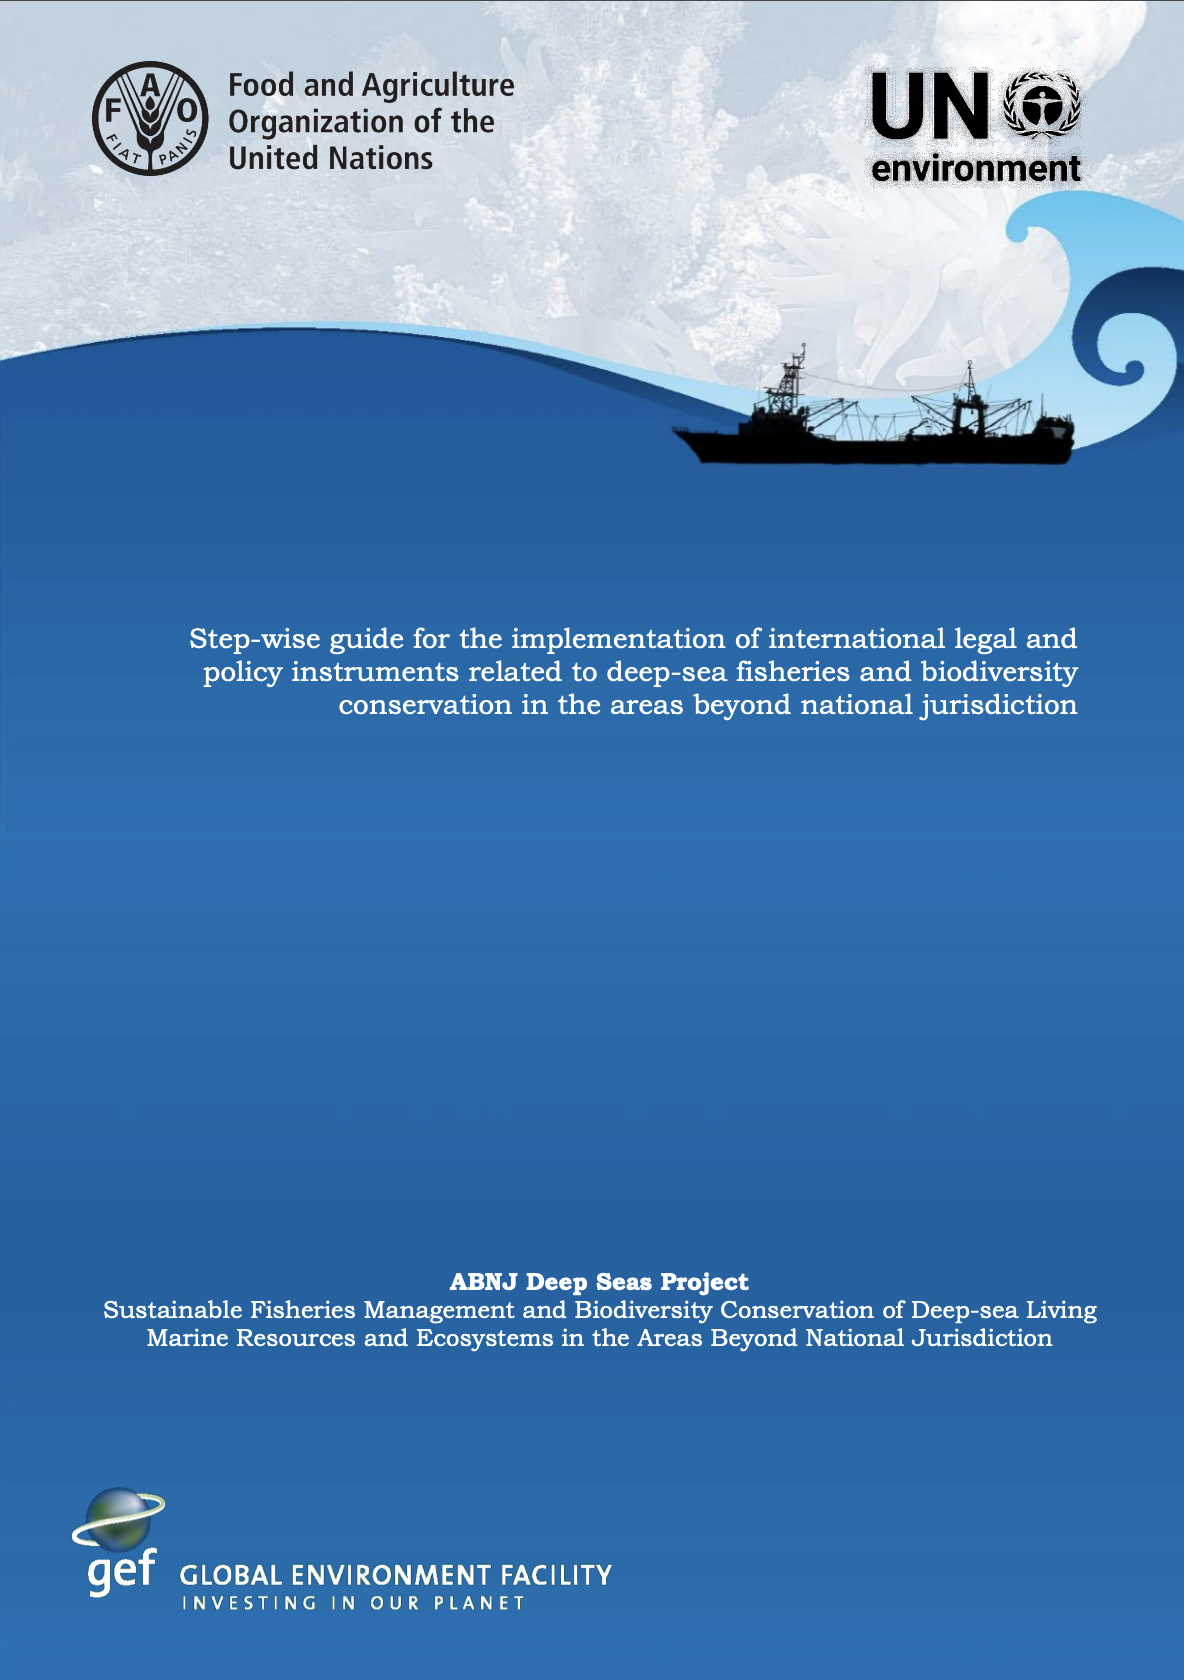 Step-wise guide for the implementation of international legal and policy instruments related to deep-sea fisheries and biodiversity conservation in areas beyond national jurisdiction.